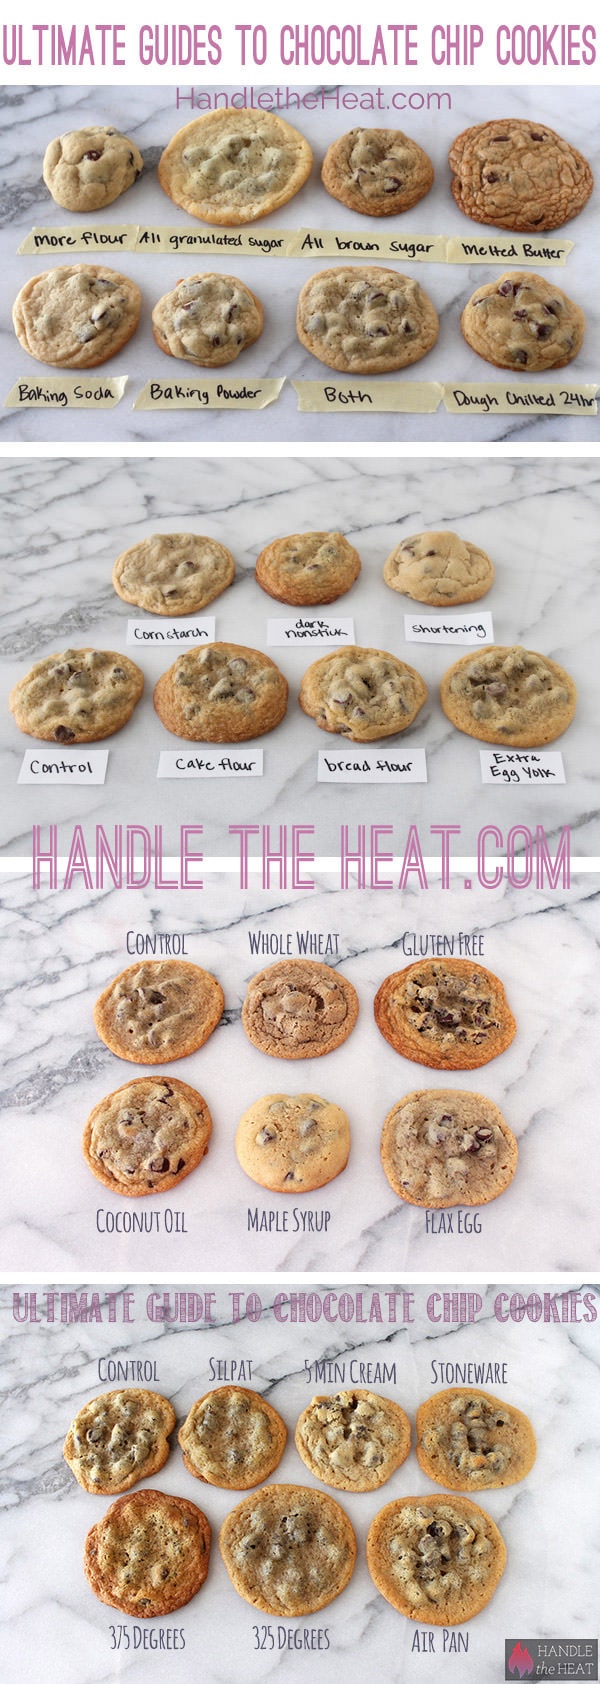 Ultimate Guide to Chocolate Chip Cookies Parts 1, 2, 3, and 4! Everything you need to know about baking cookies!